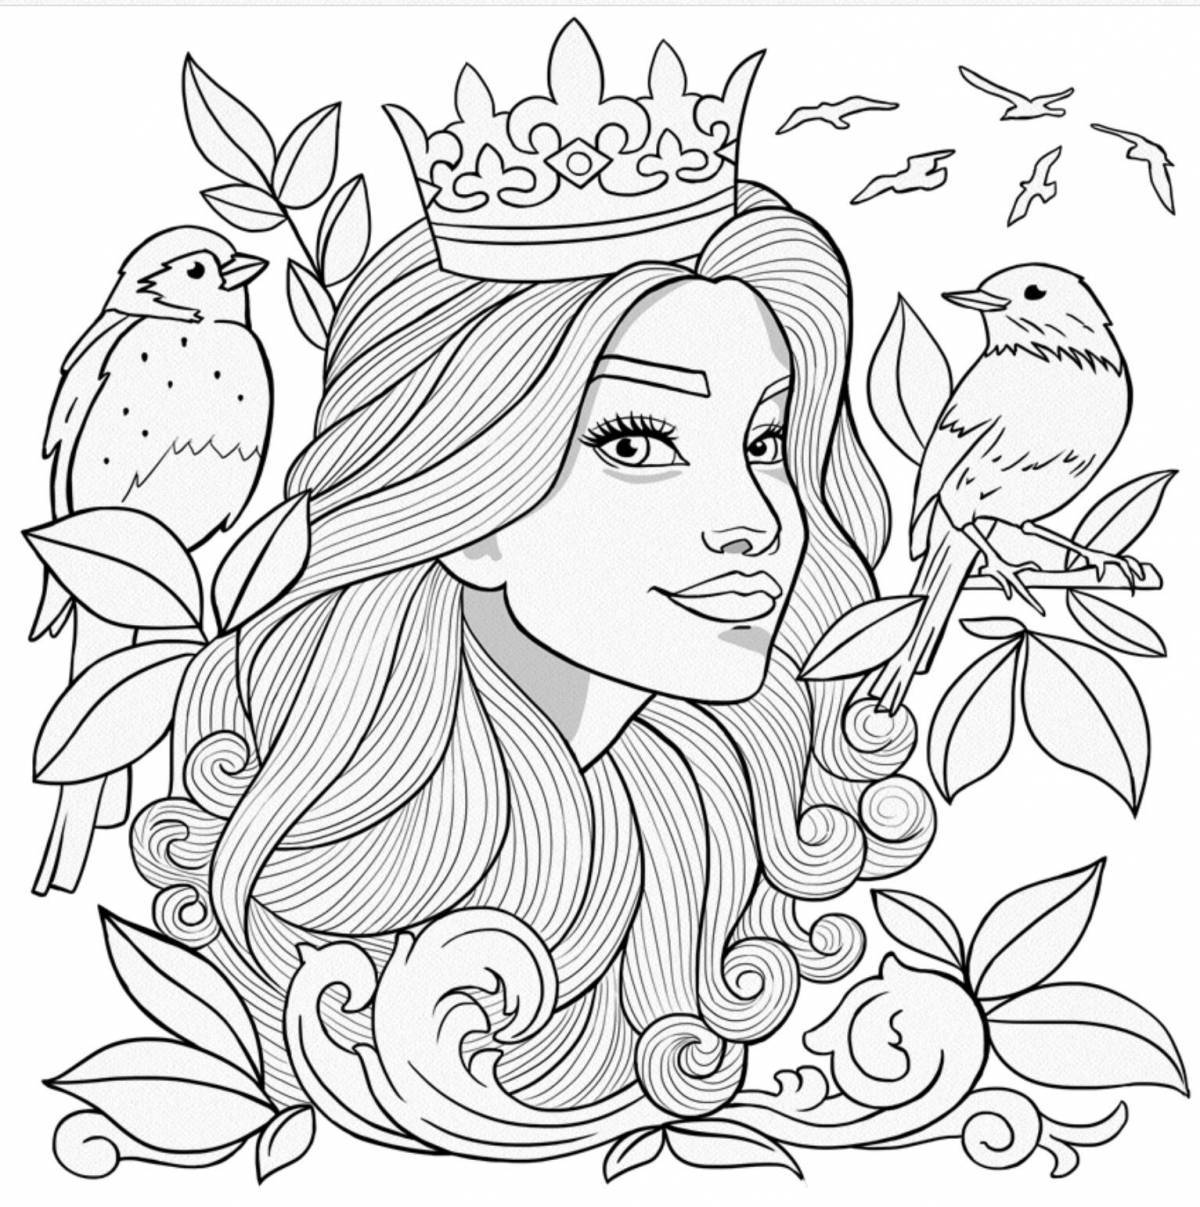 Exquisite coloring book for 13 year old girls